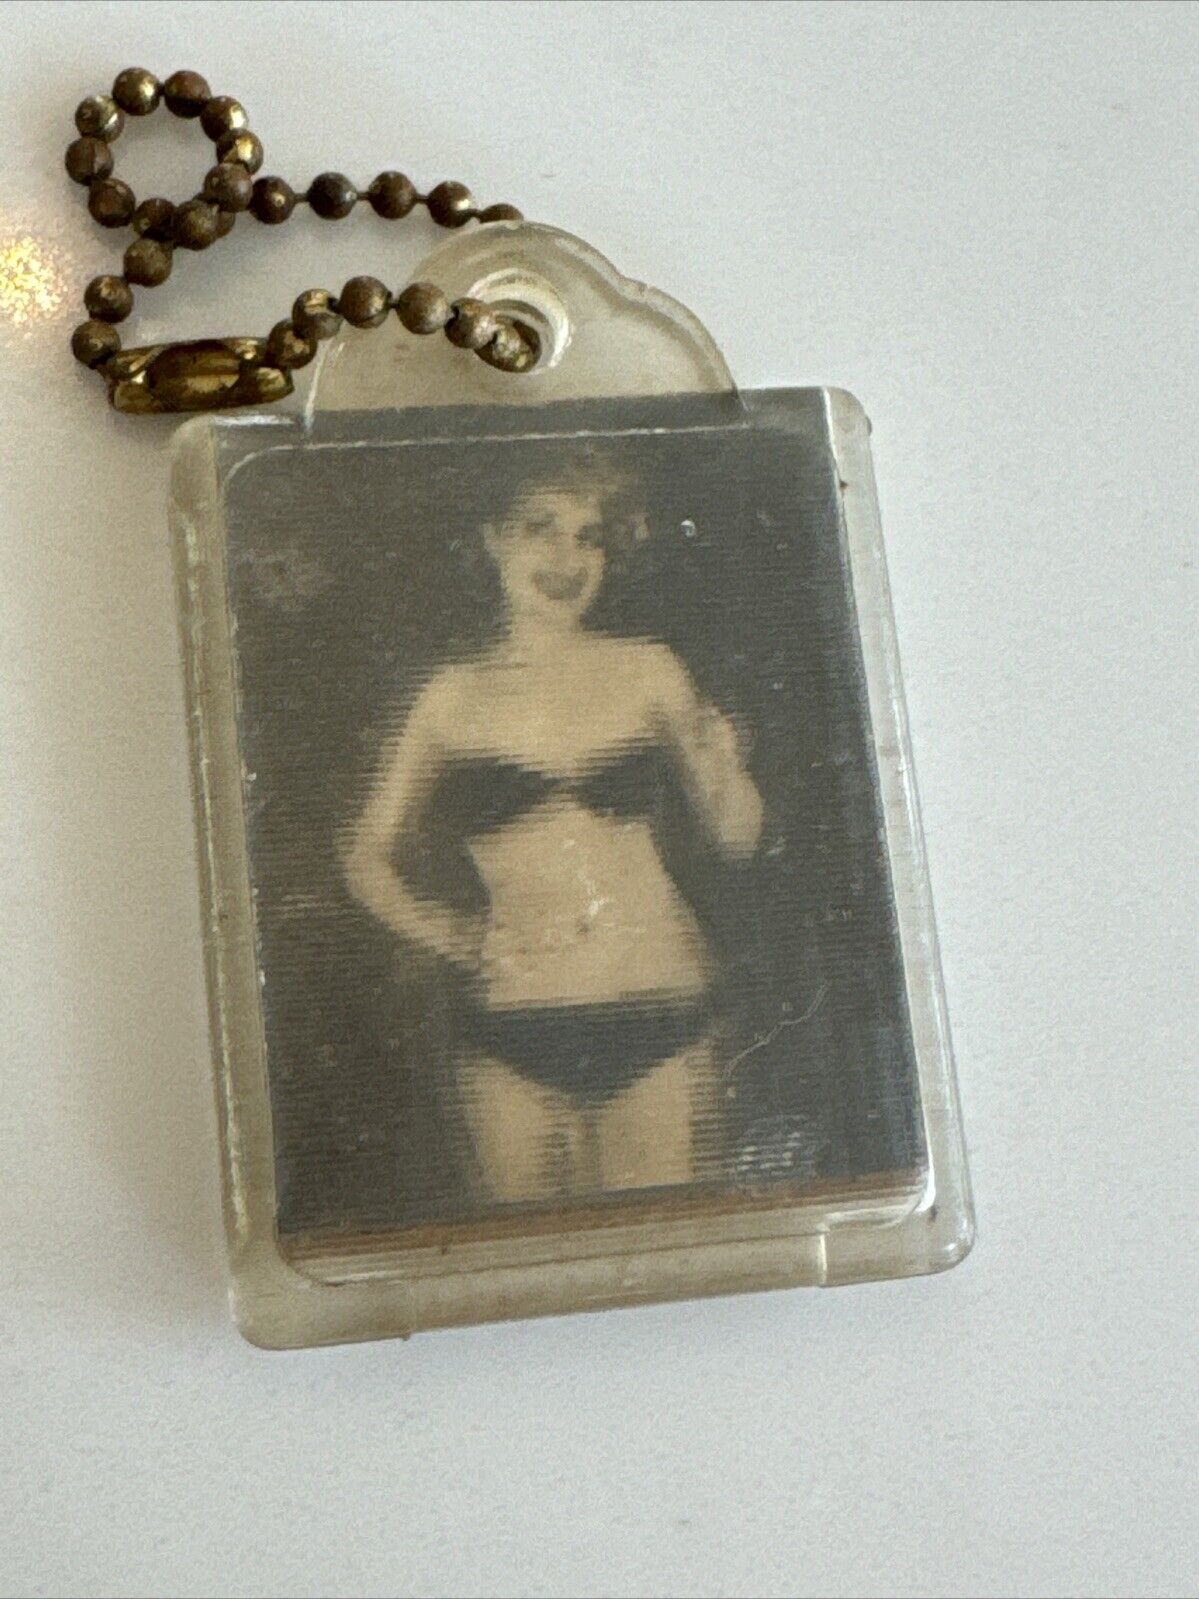 Vintage 1960’s Pinup Dancing Girl Keychain Lithograph (Dances When Moved)